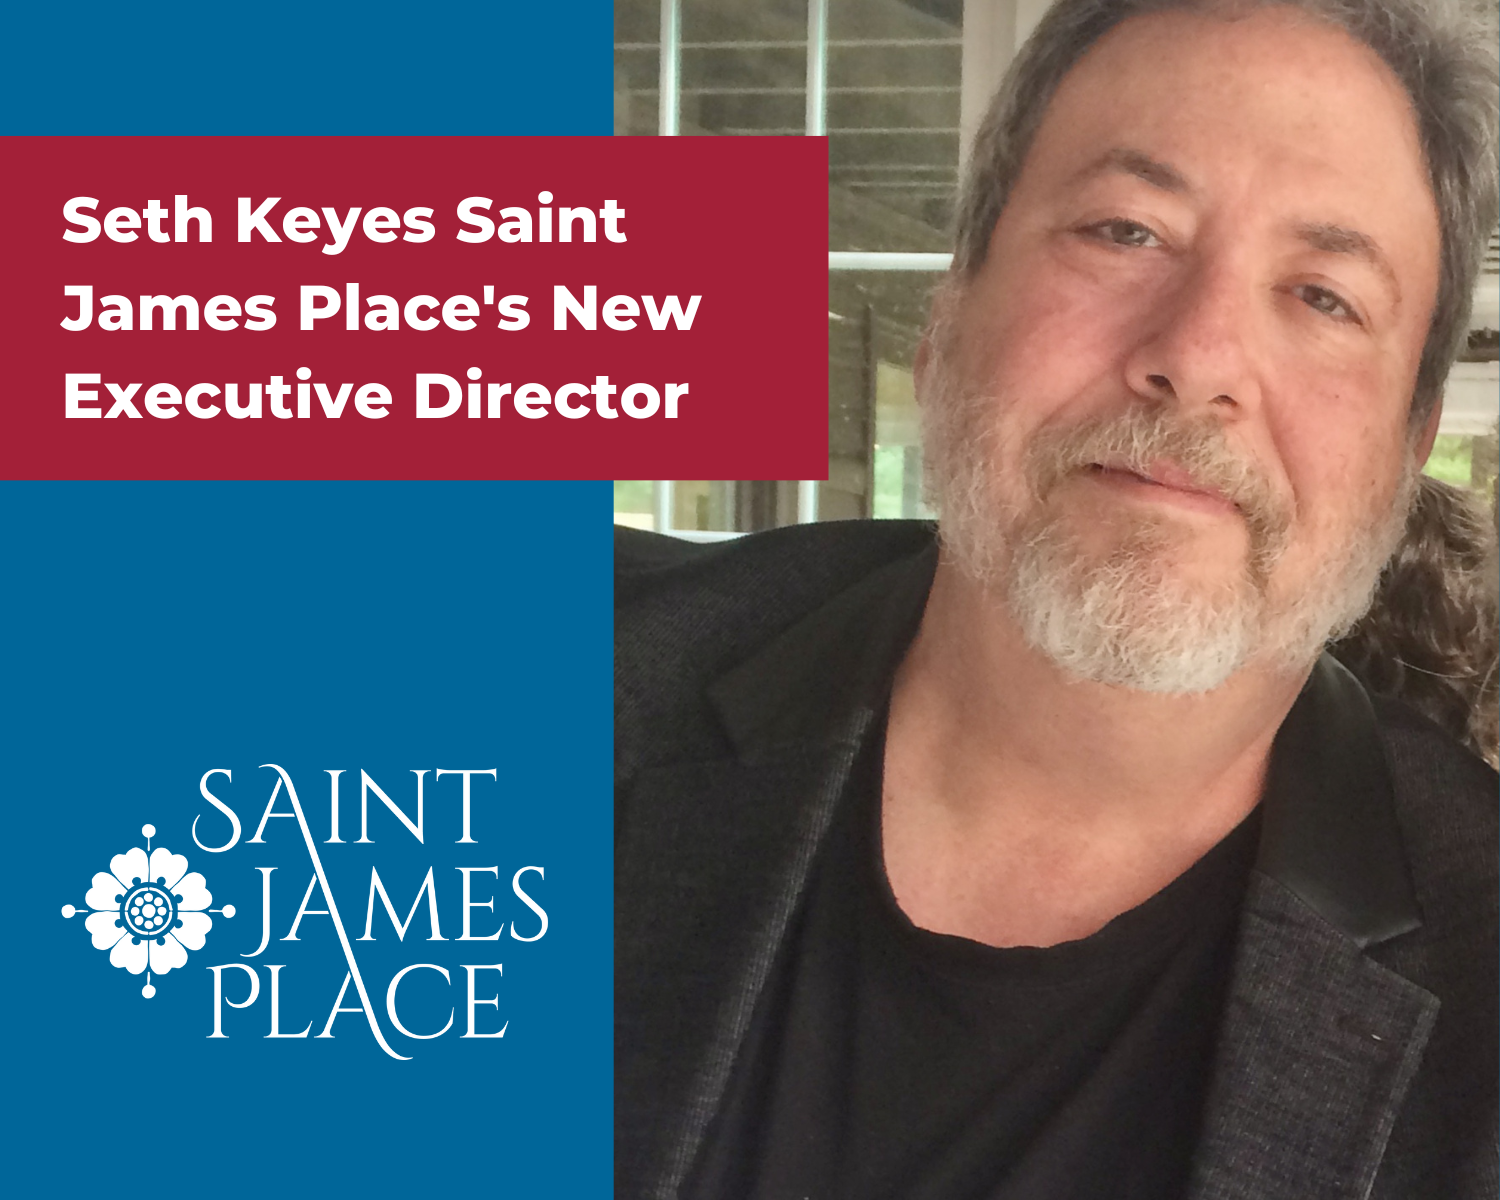 Saint James Place Appoints Seth Keyes as Executive Director